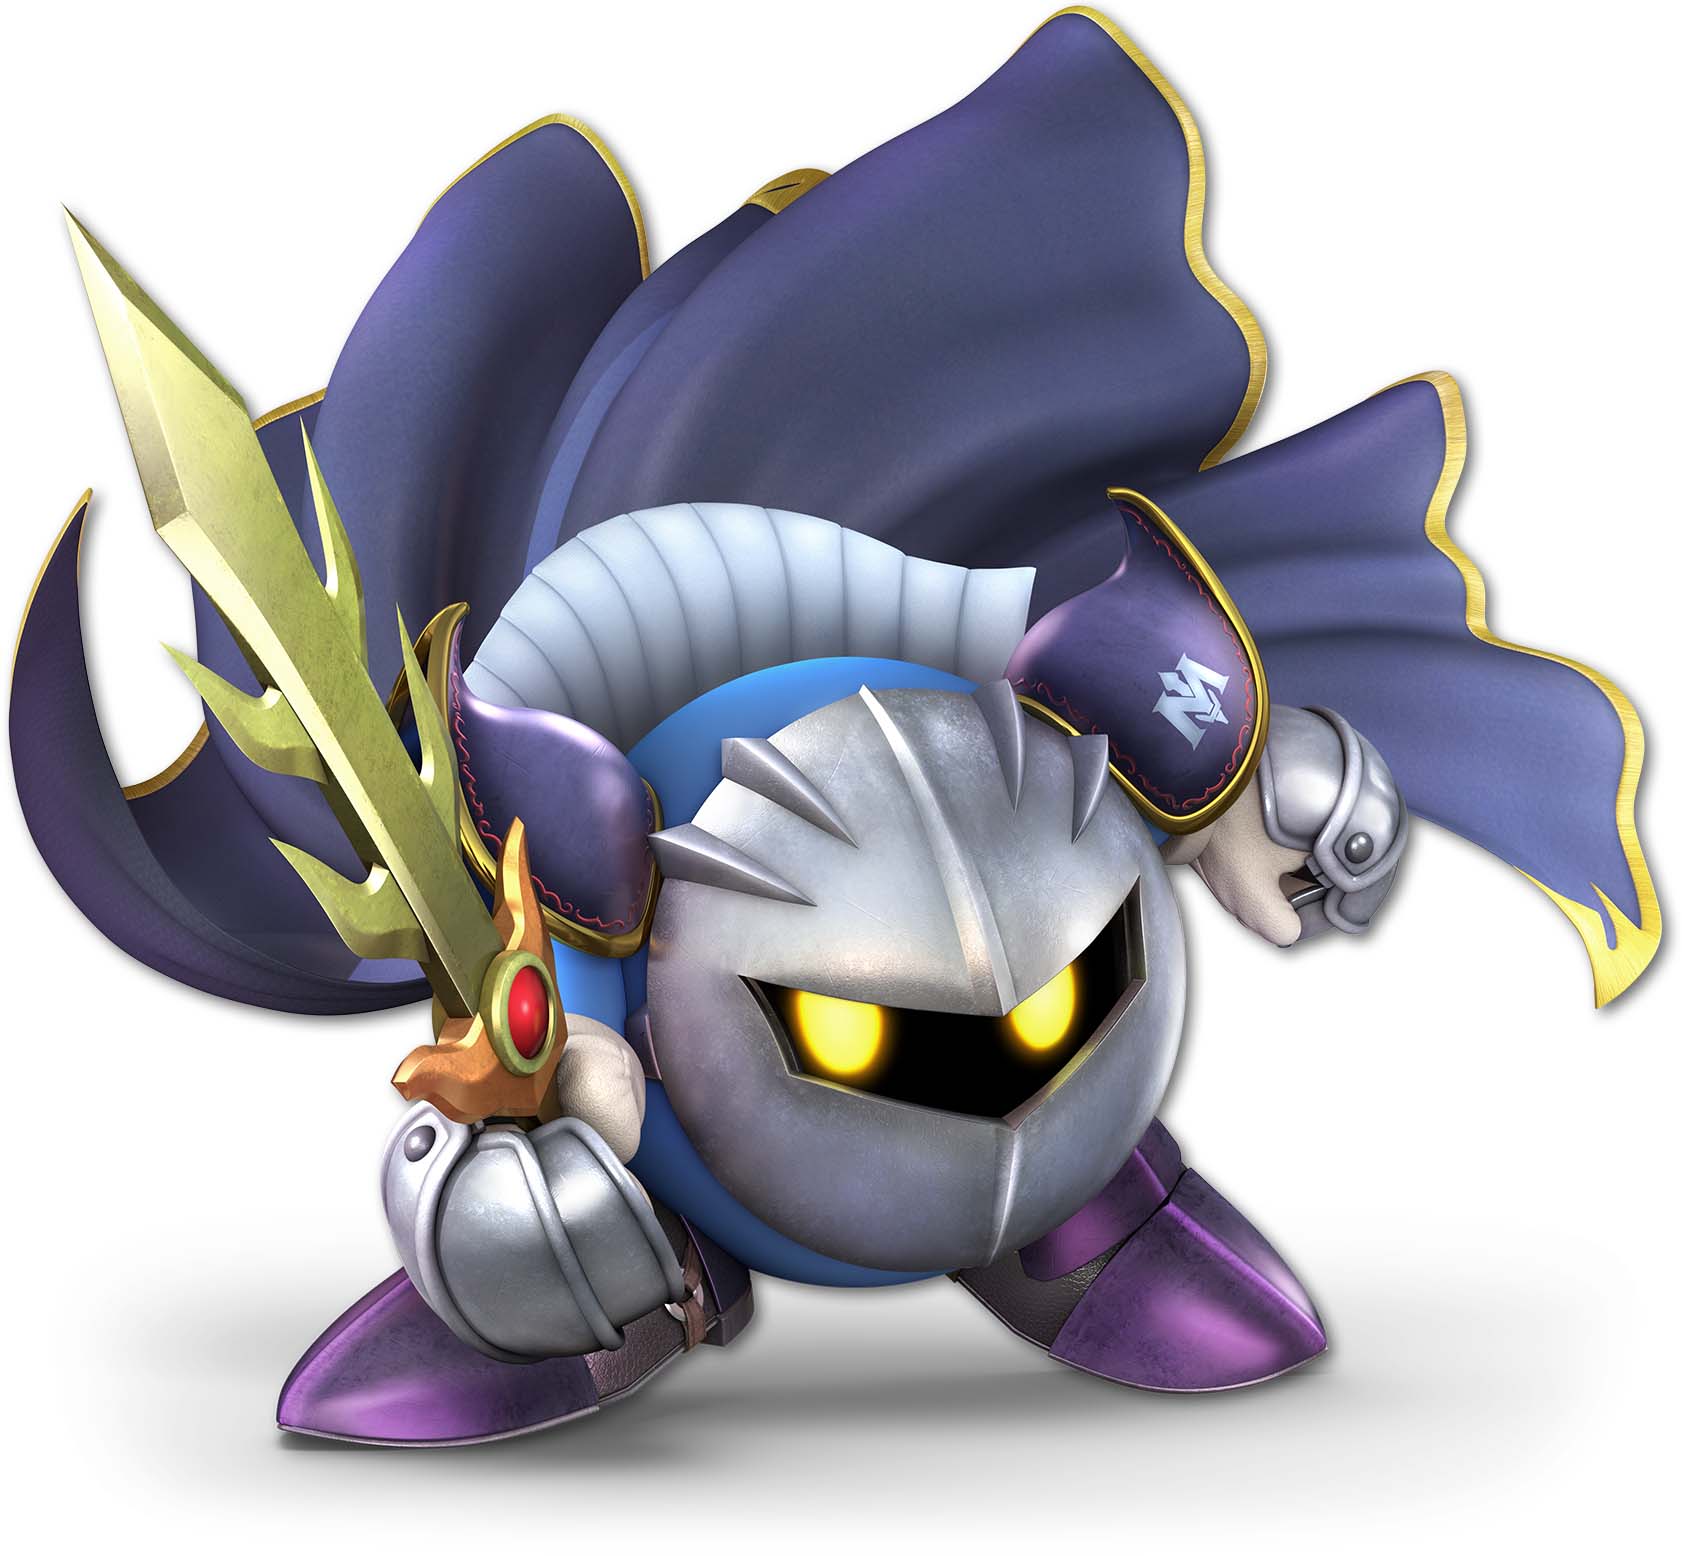 How to counter Meta Knight with Mario in Super Smash Bros. Ultimate